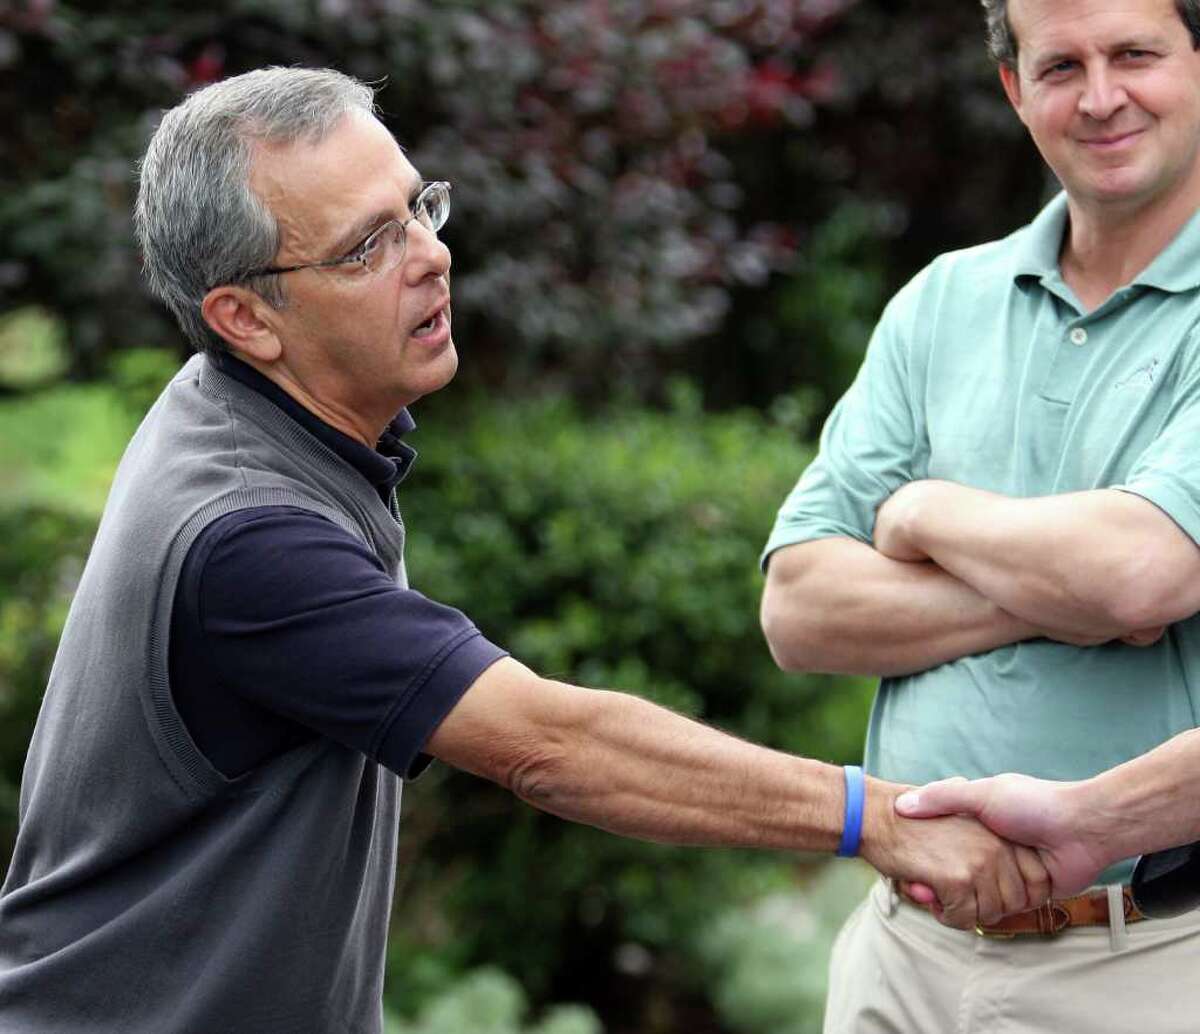 NY sports journalist Mike Lupica greets a guest at the annual Mike Lupica/Fred Wilpon golf outing at Fairview Country Club in Greenwich, Conn. on Monday June 20, 2011. The event is a fundraiser for the Special Olympics.